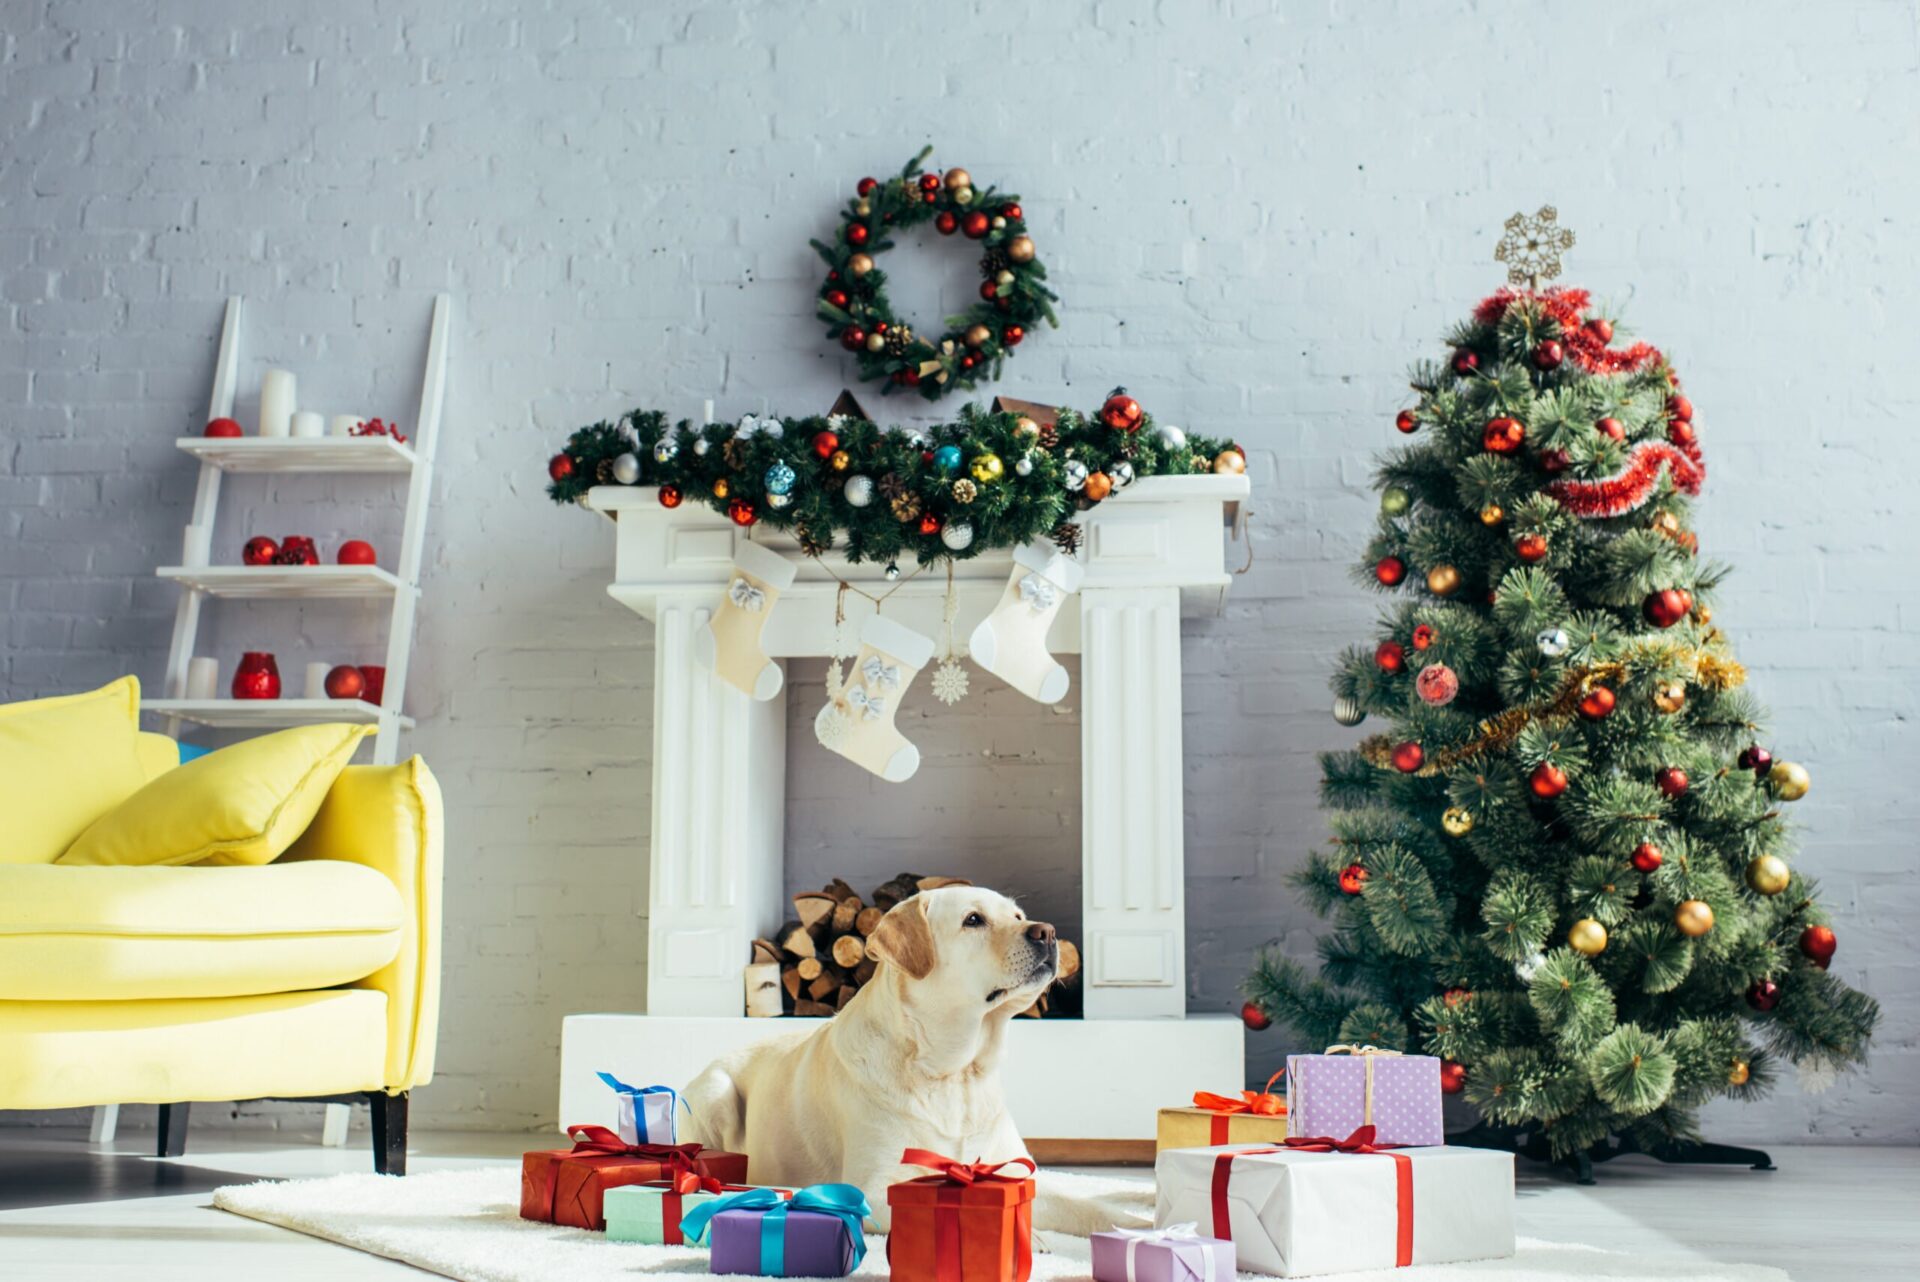 white dog next to christmas tree with gifts